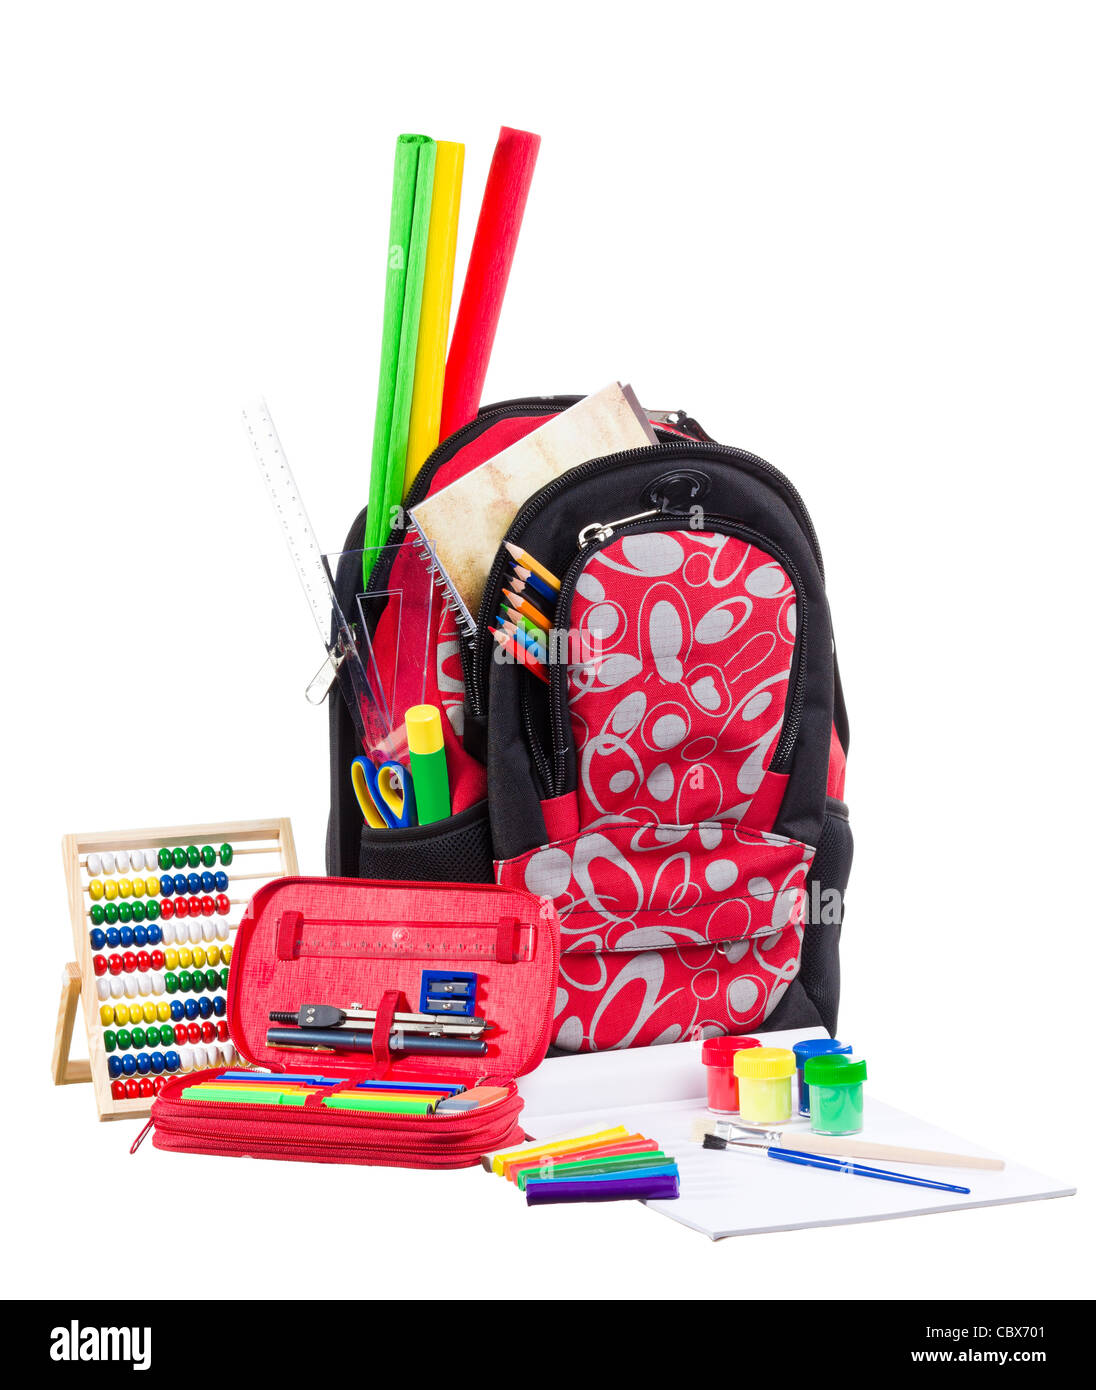 Books And School Supplies Isolated On White Stock Photo - Download Image  Now - Equipment, School Supplies, Back to School - iStock